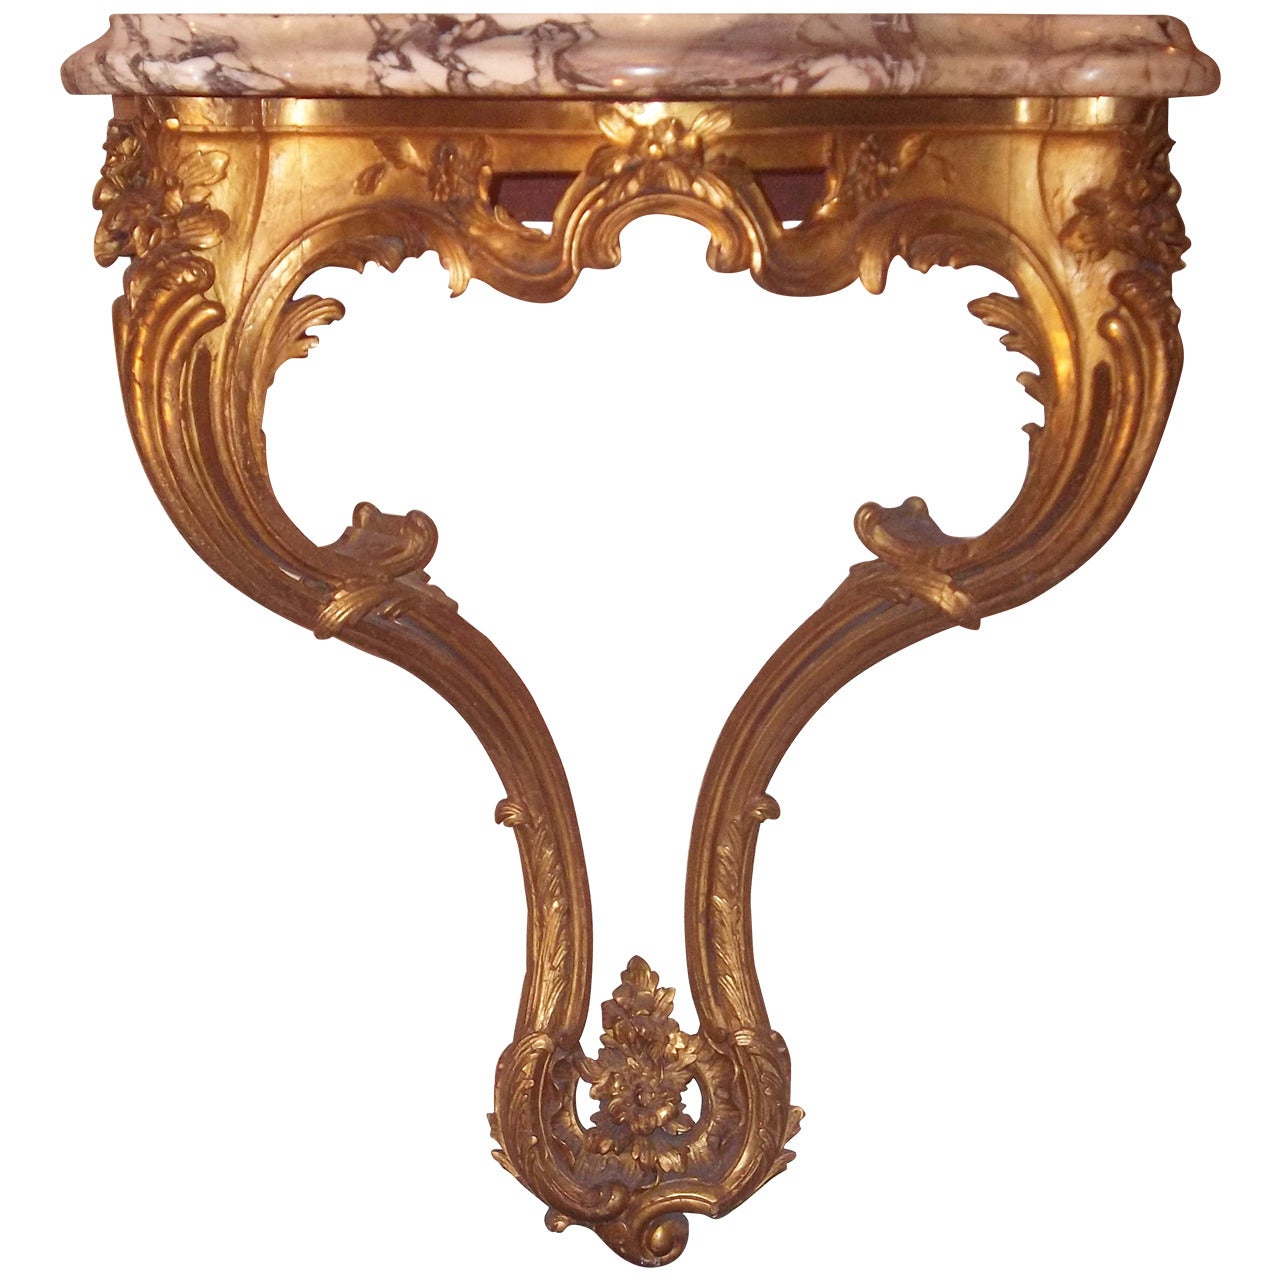 Louis XV Style Giltwood Console of Cul de Lampe Form